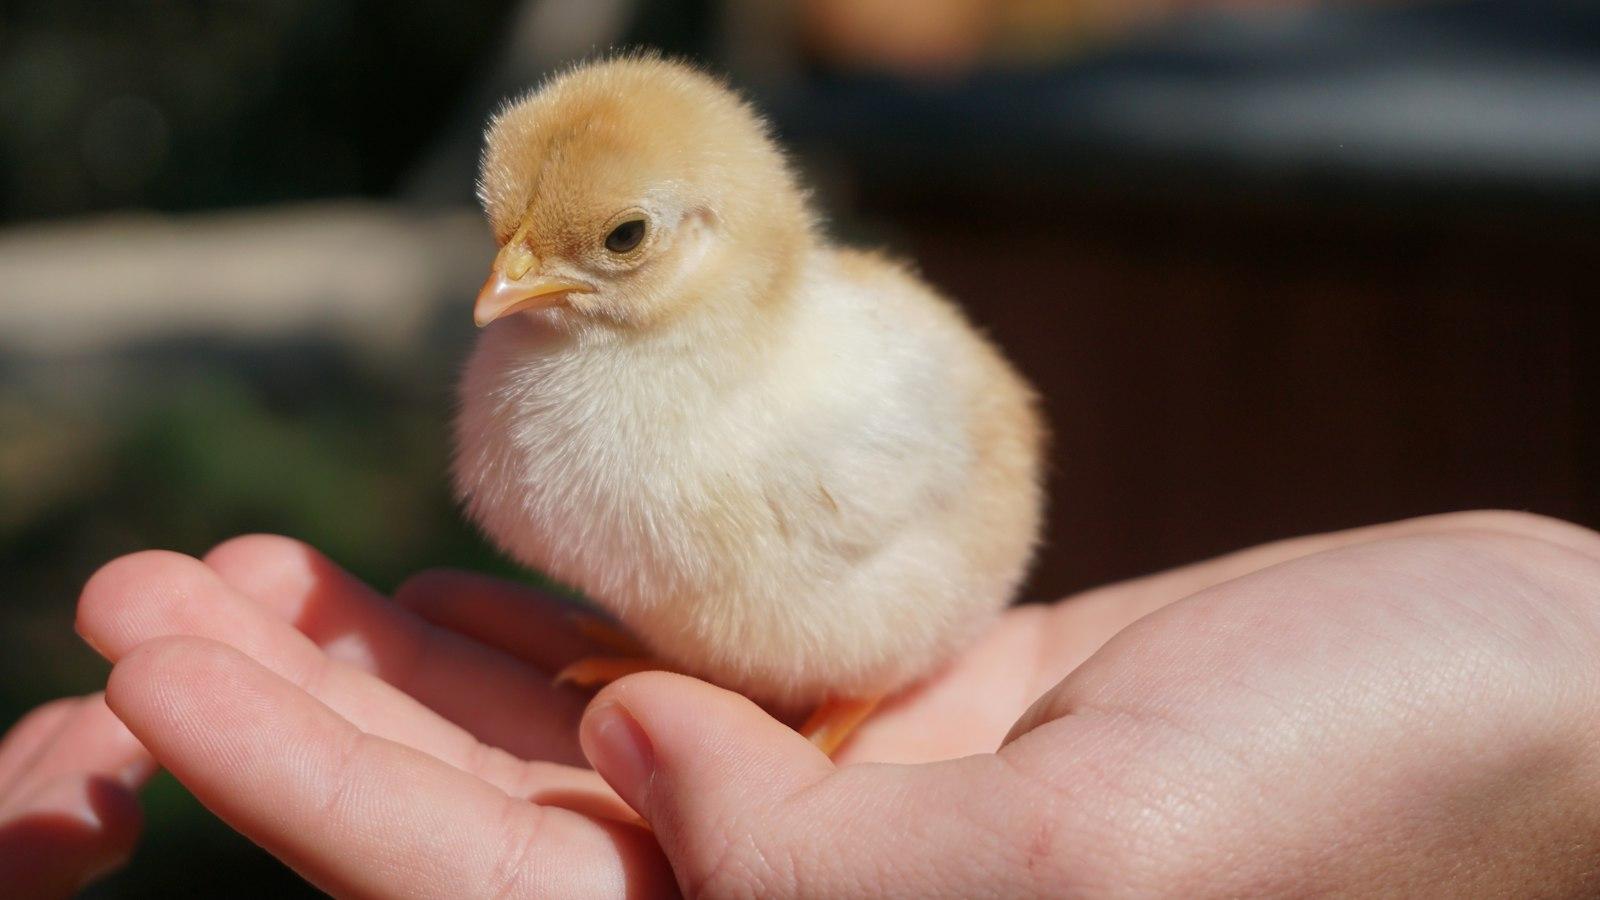 Why Do Baby Chicks Chirp So Much